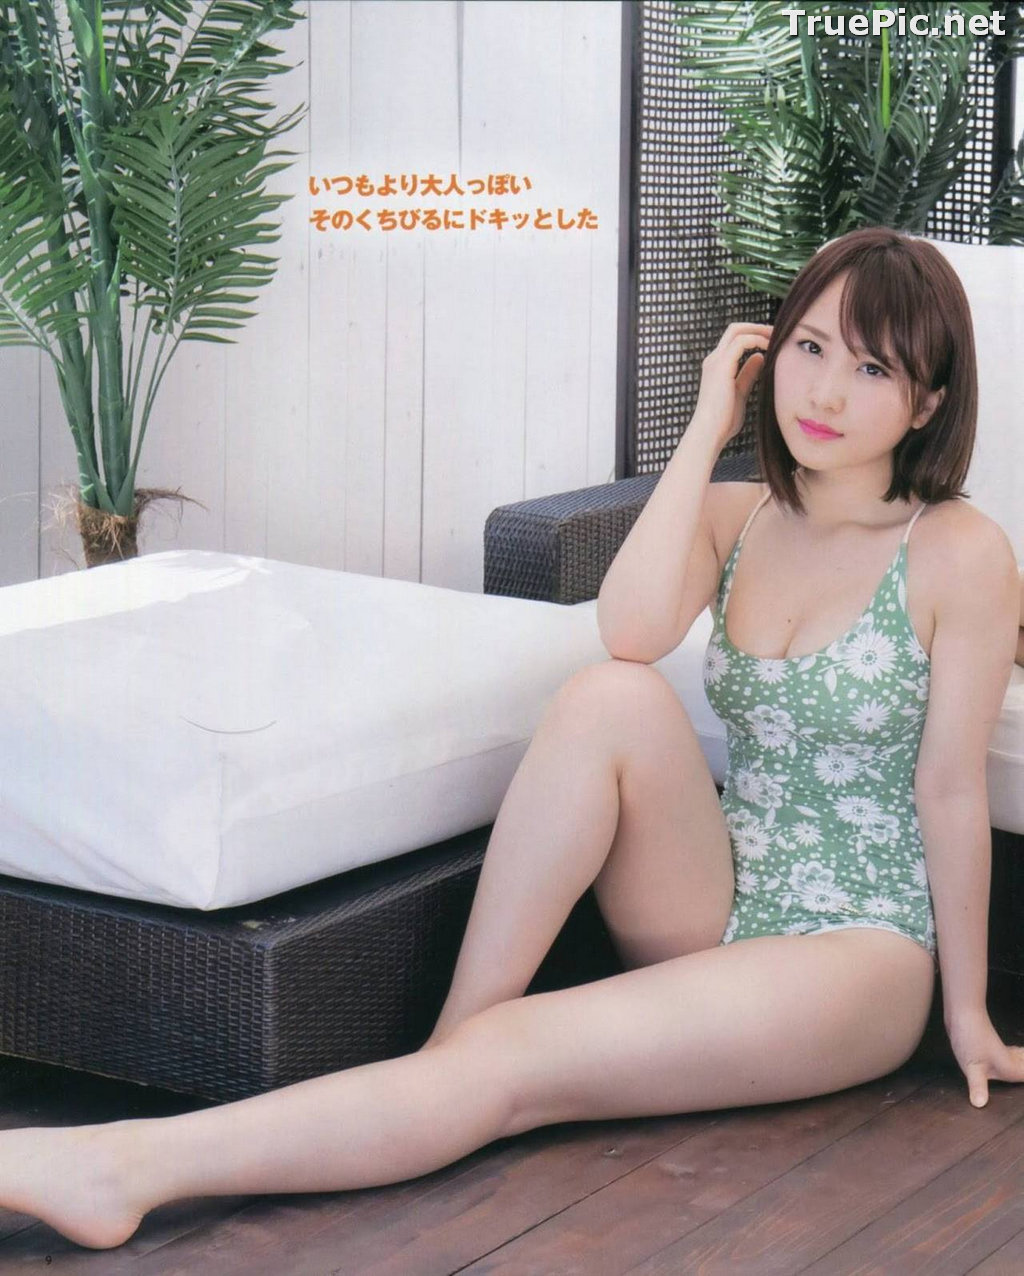 Image Japanese Beauty – Juri Takahashi - Sexy Picture Collection 2020 - TruePic.net - Picture-27